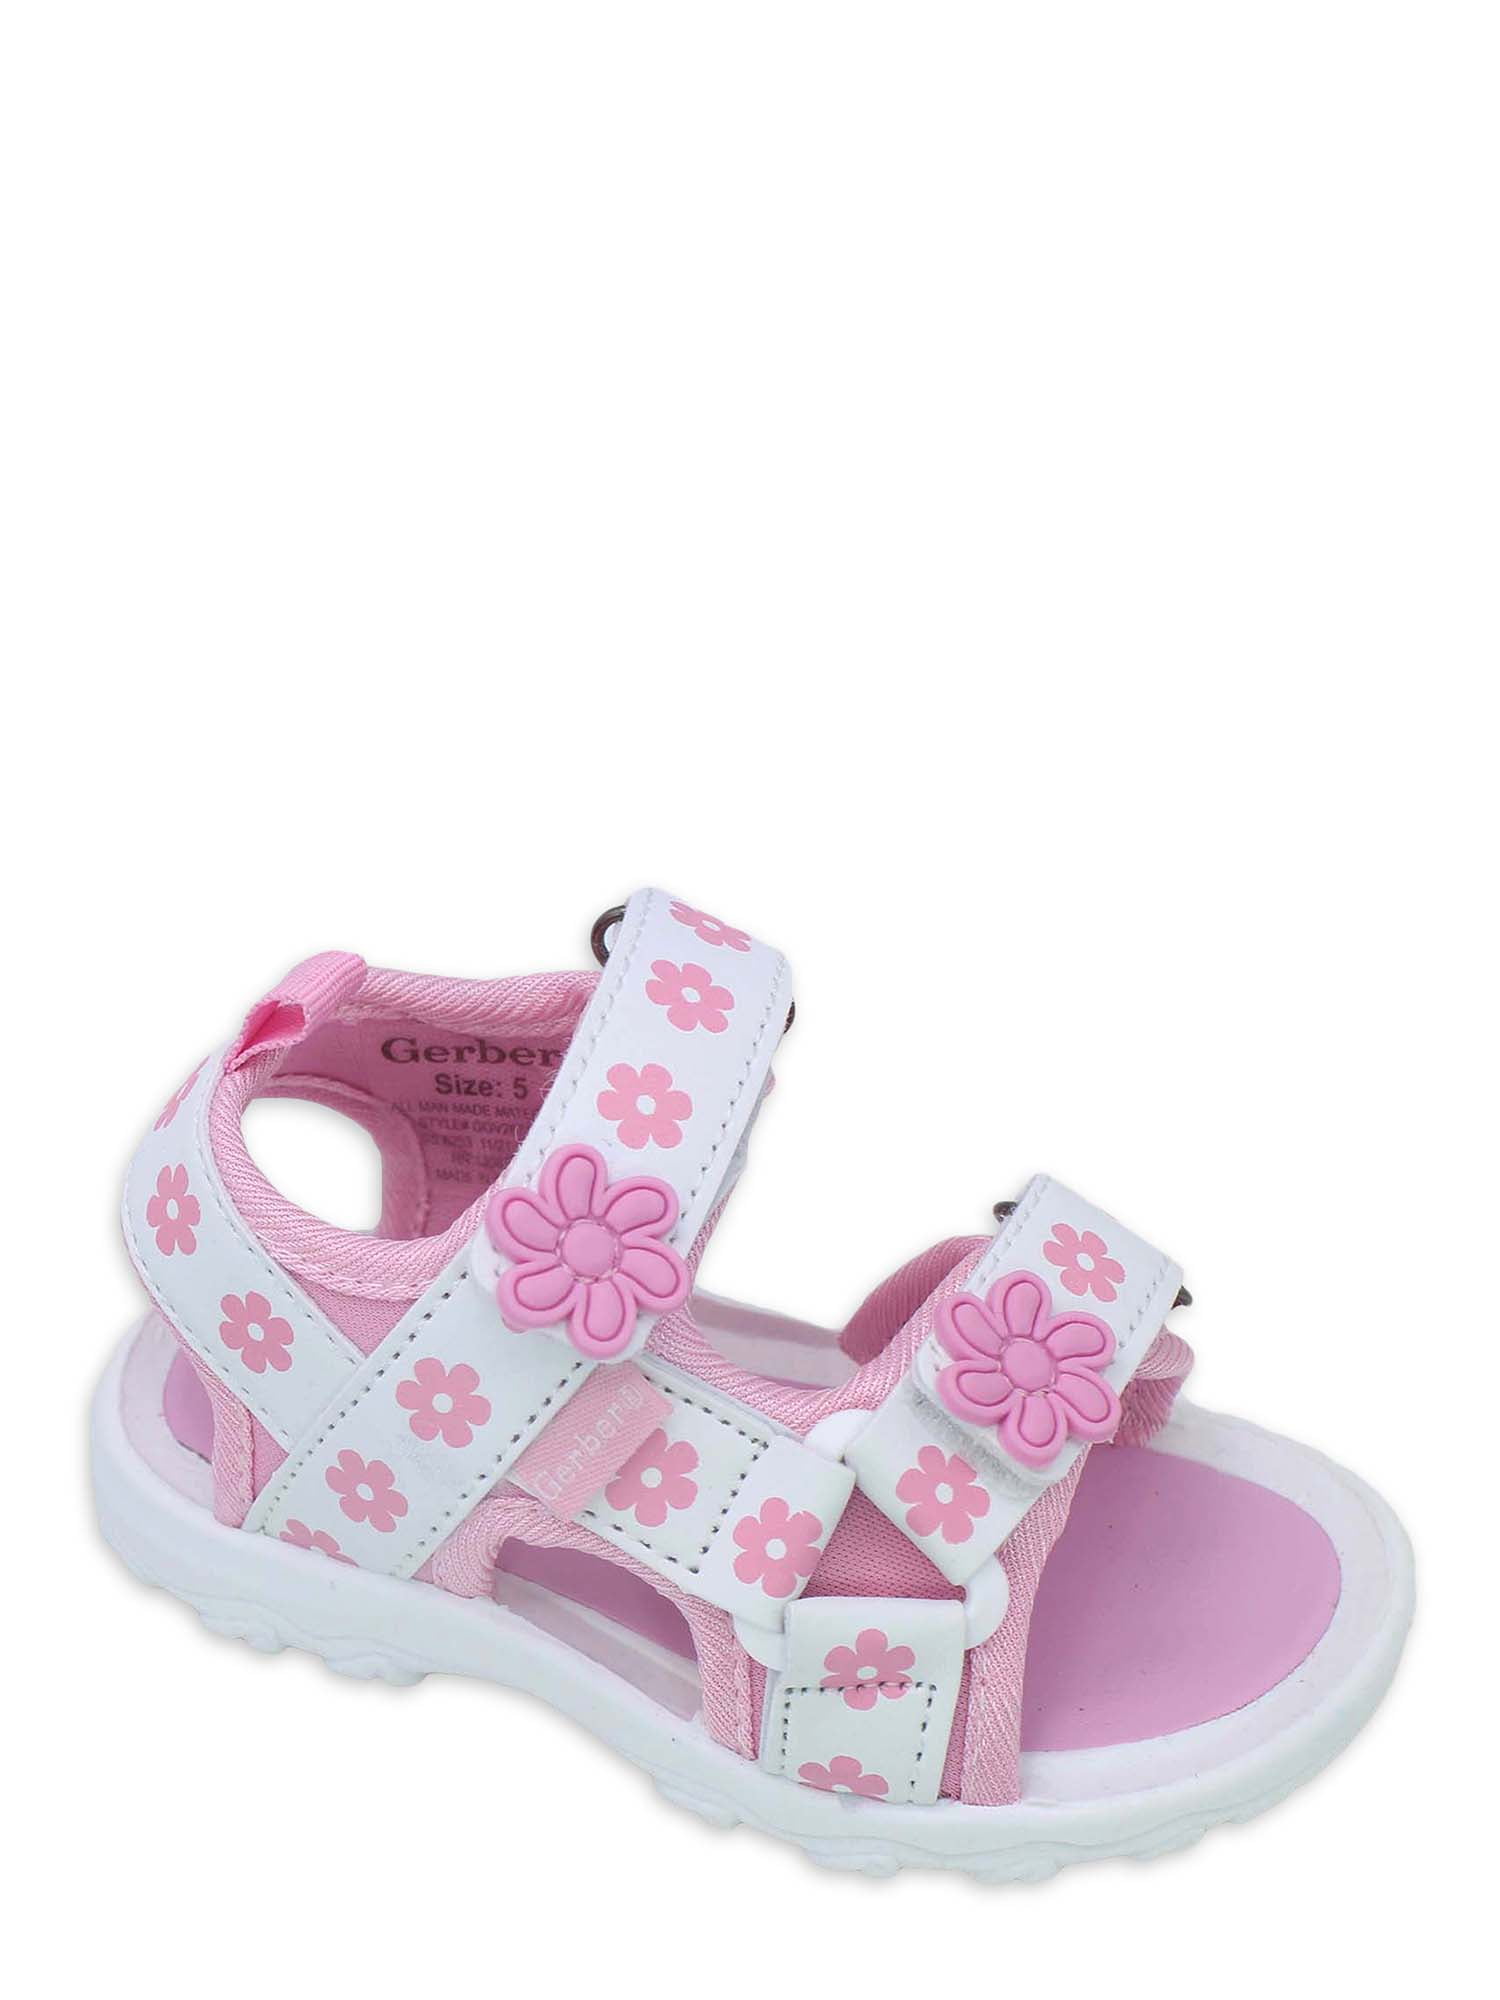 See More Colors and Sizes Skysole Girls Double Adjustable Strap Lightweight Sandals Grey & Pink 